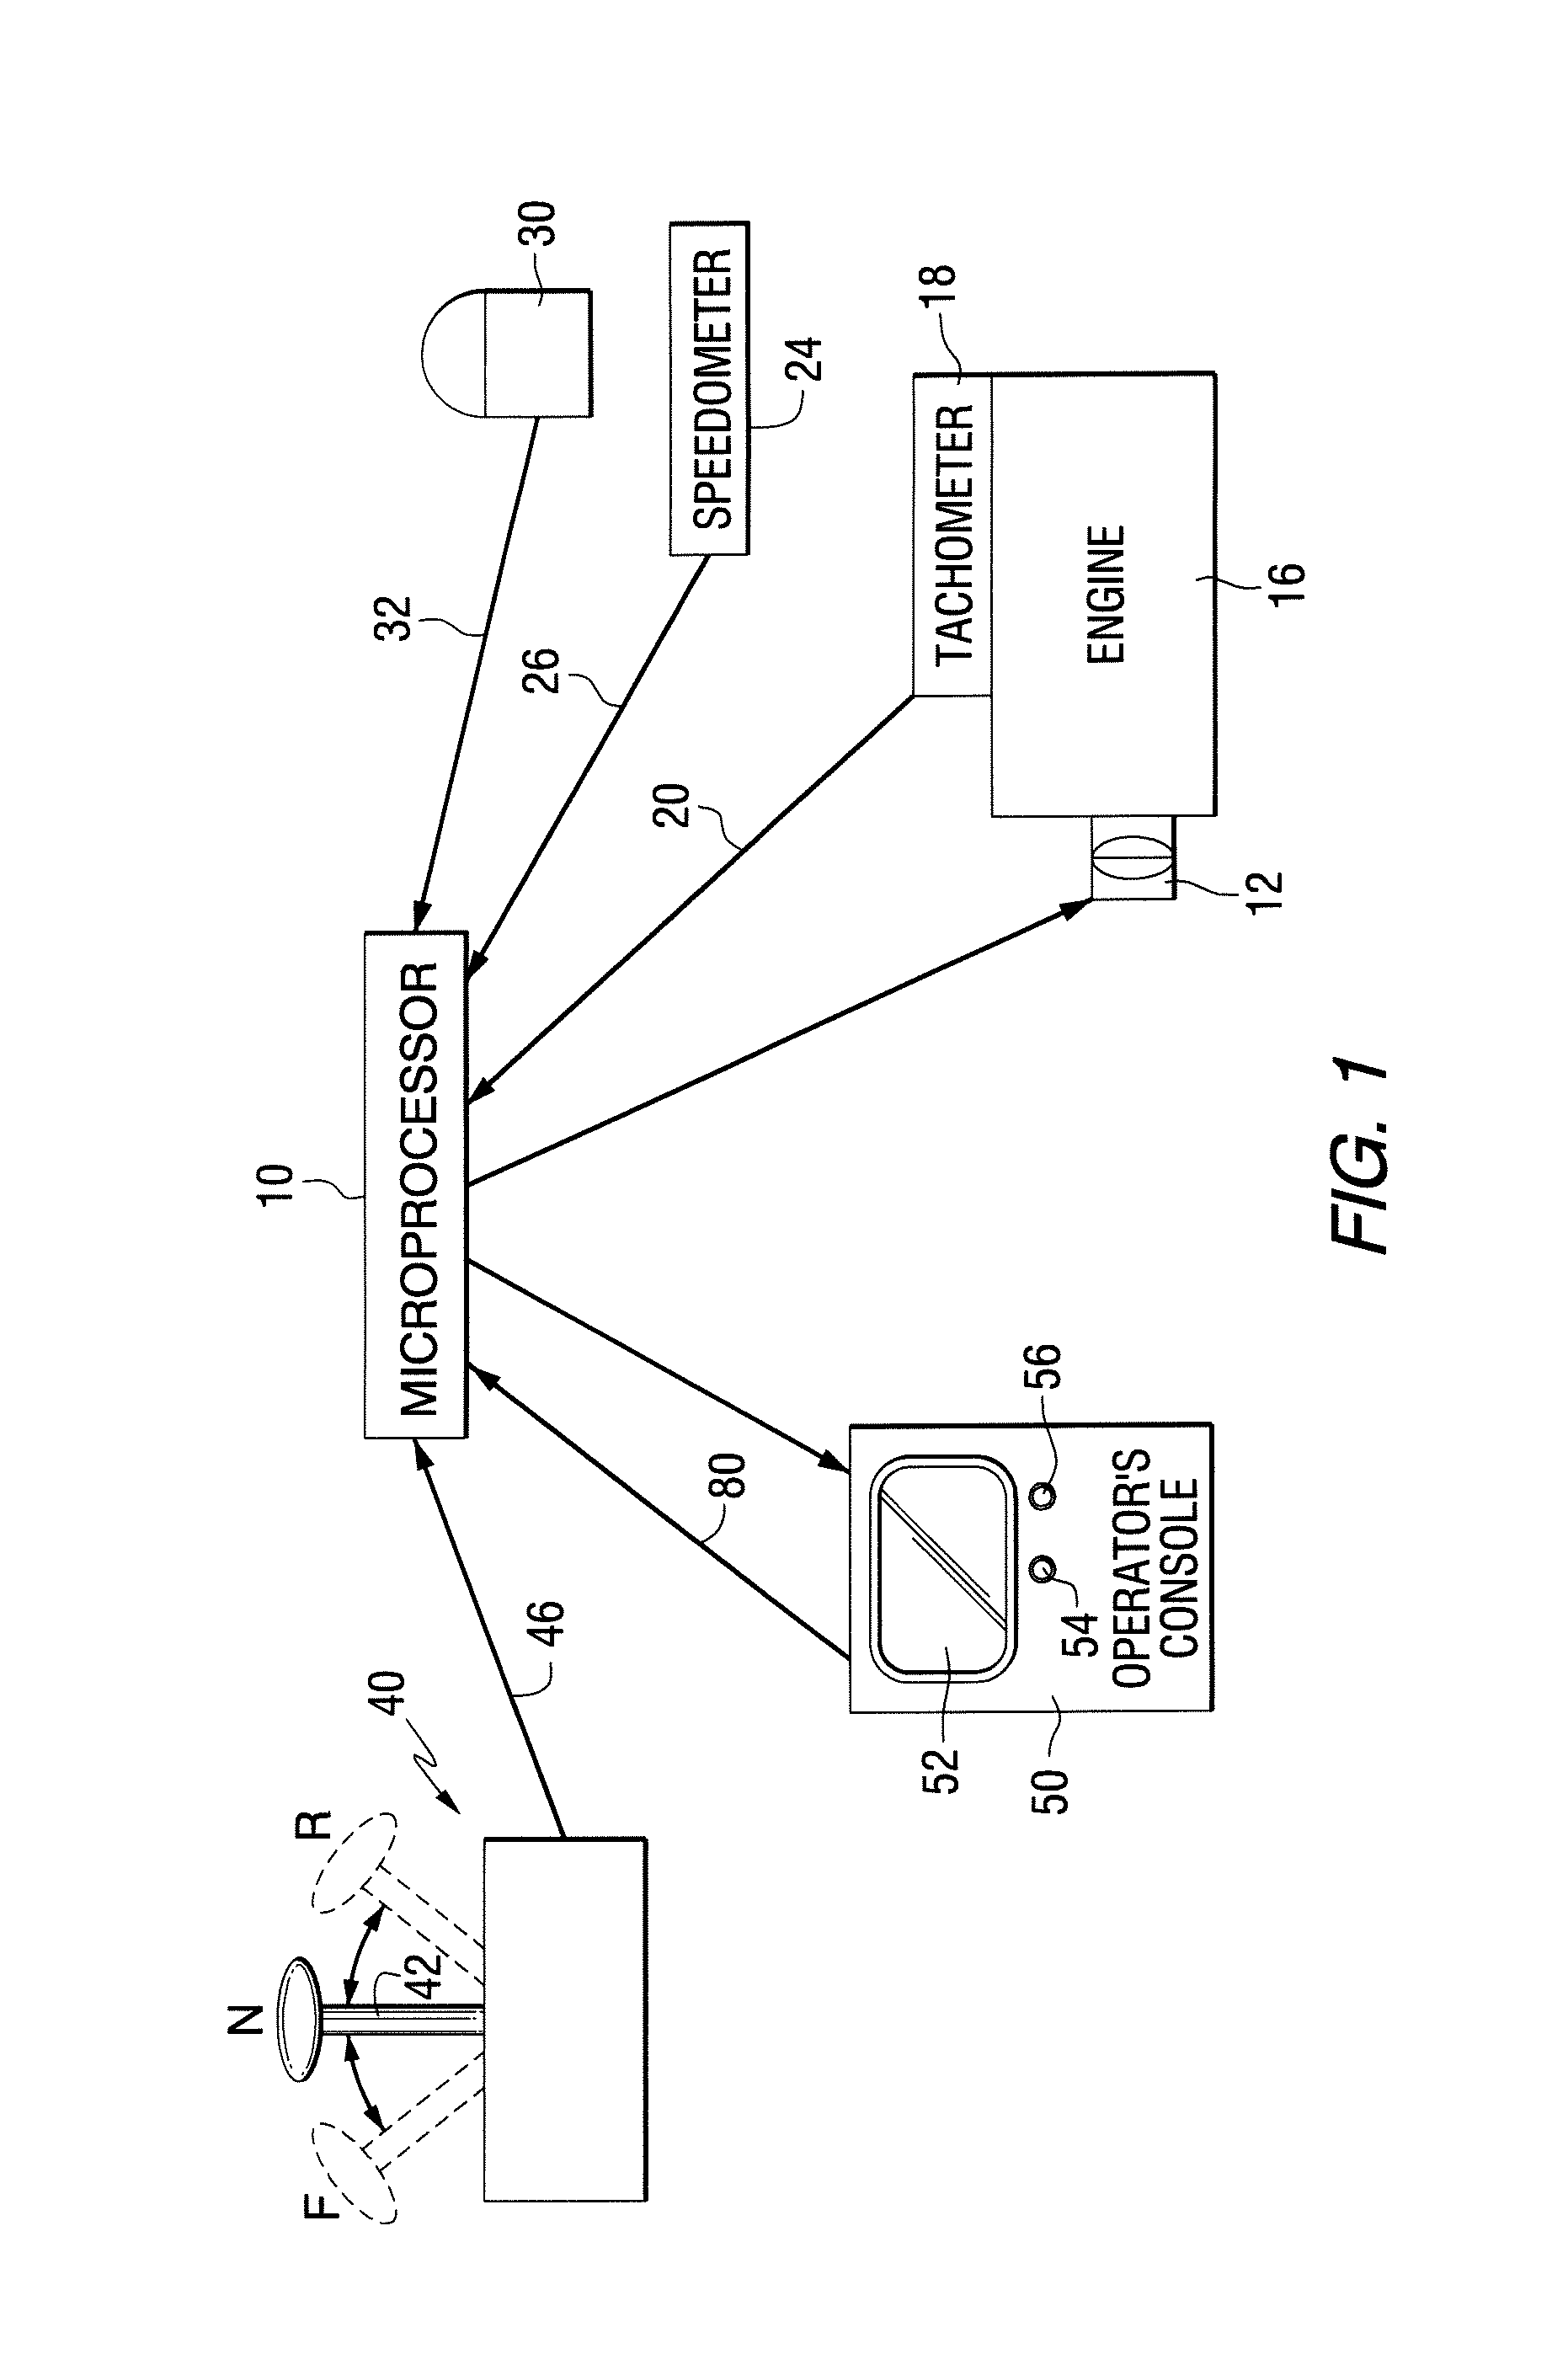 Method for controlling the acceleration of a marine vessel used for water skiing